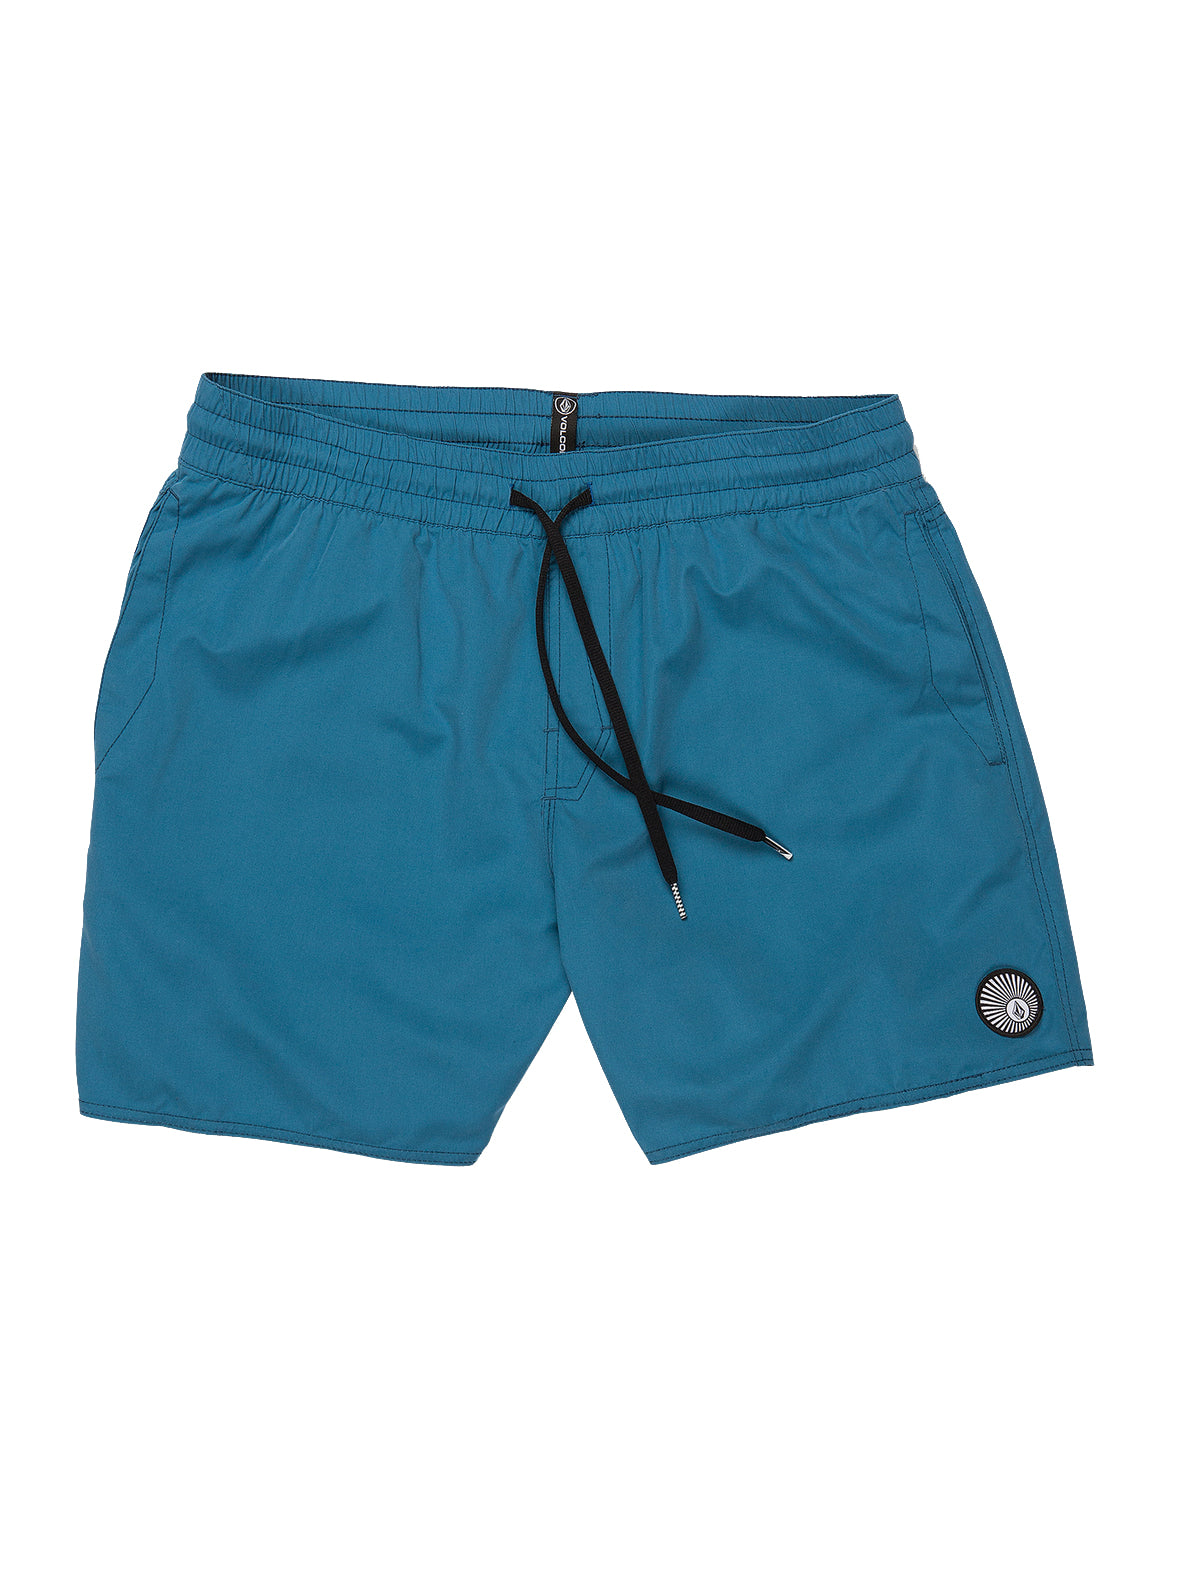 VOLCOM LIDO SOLID TRUNK 16 AIN S